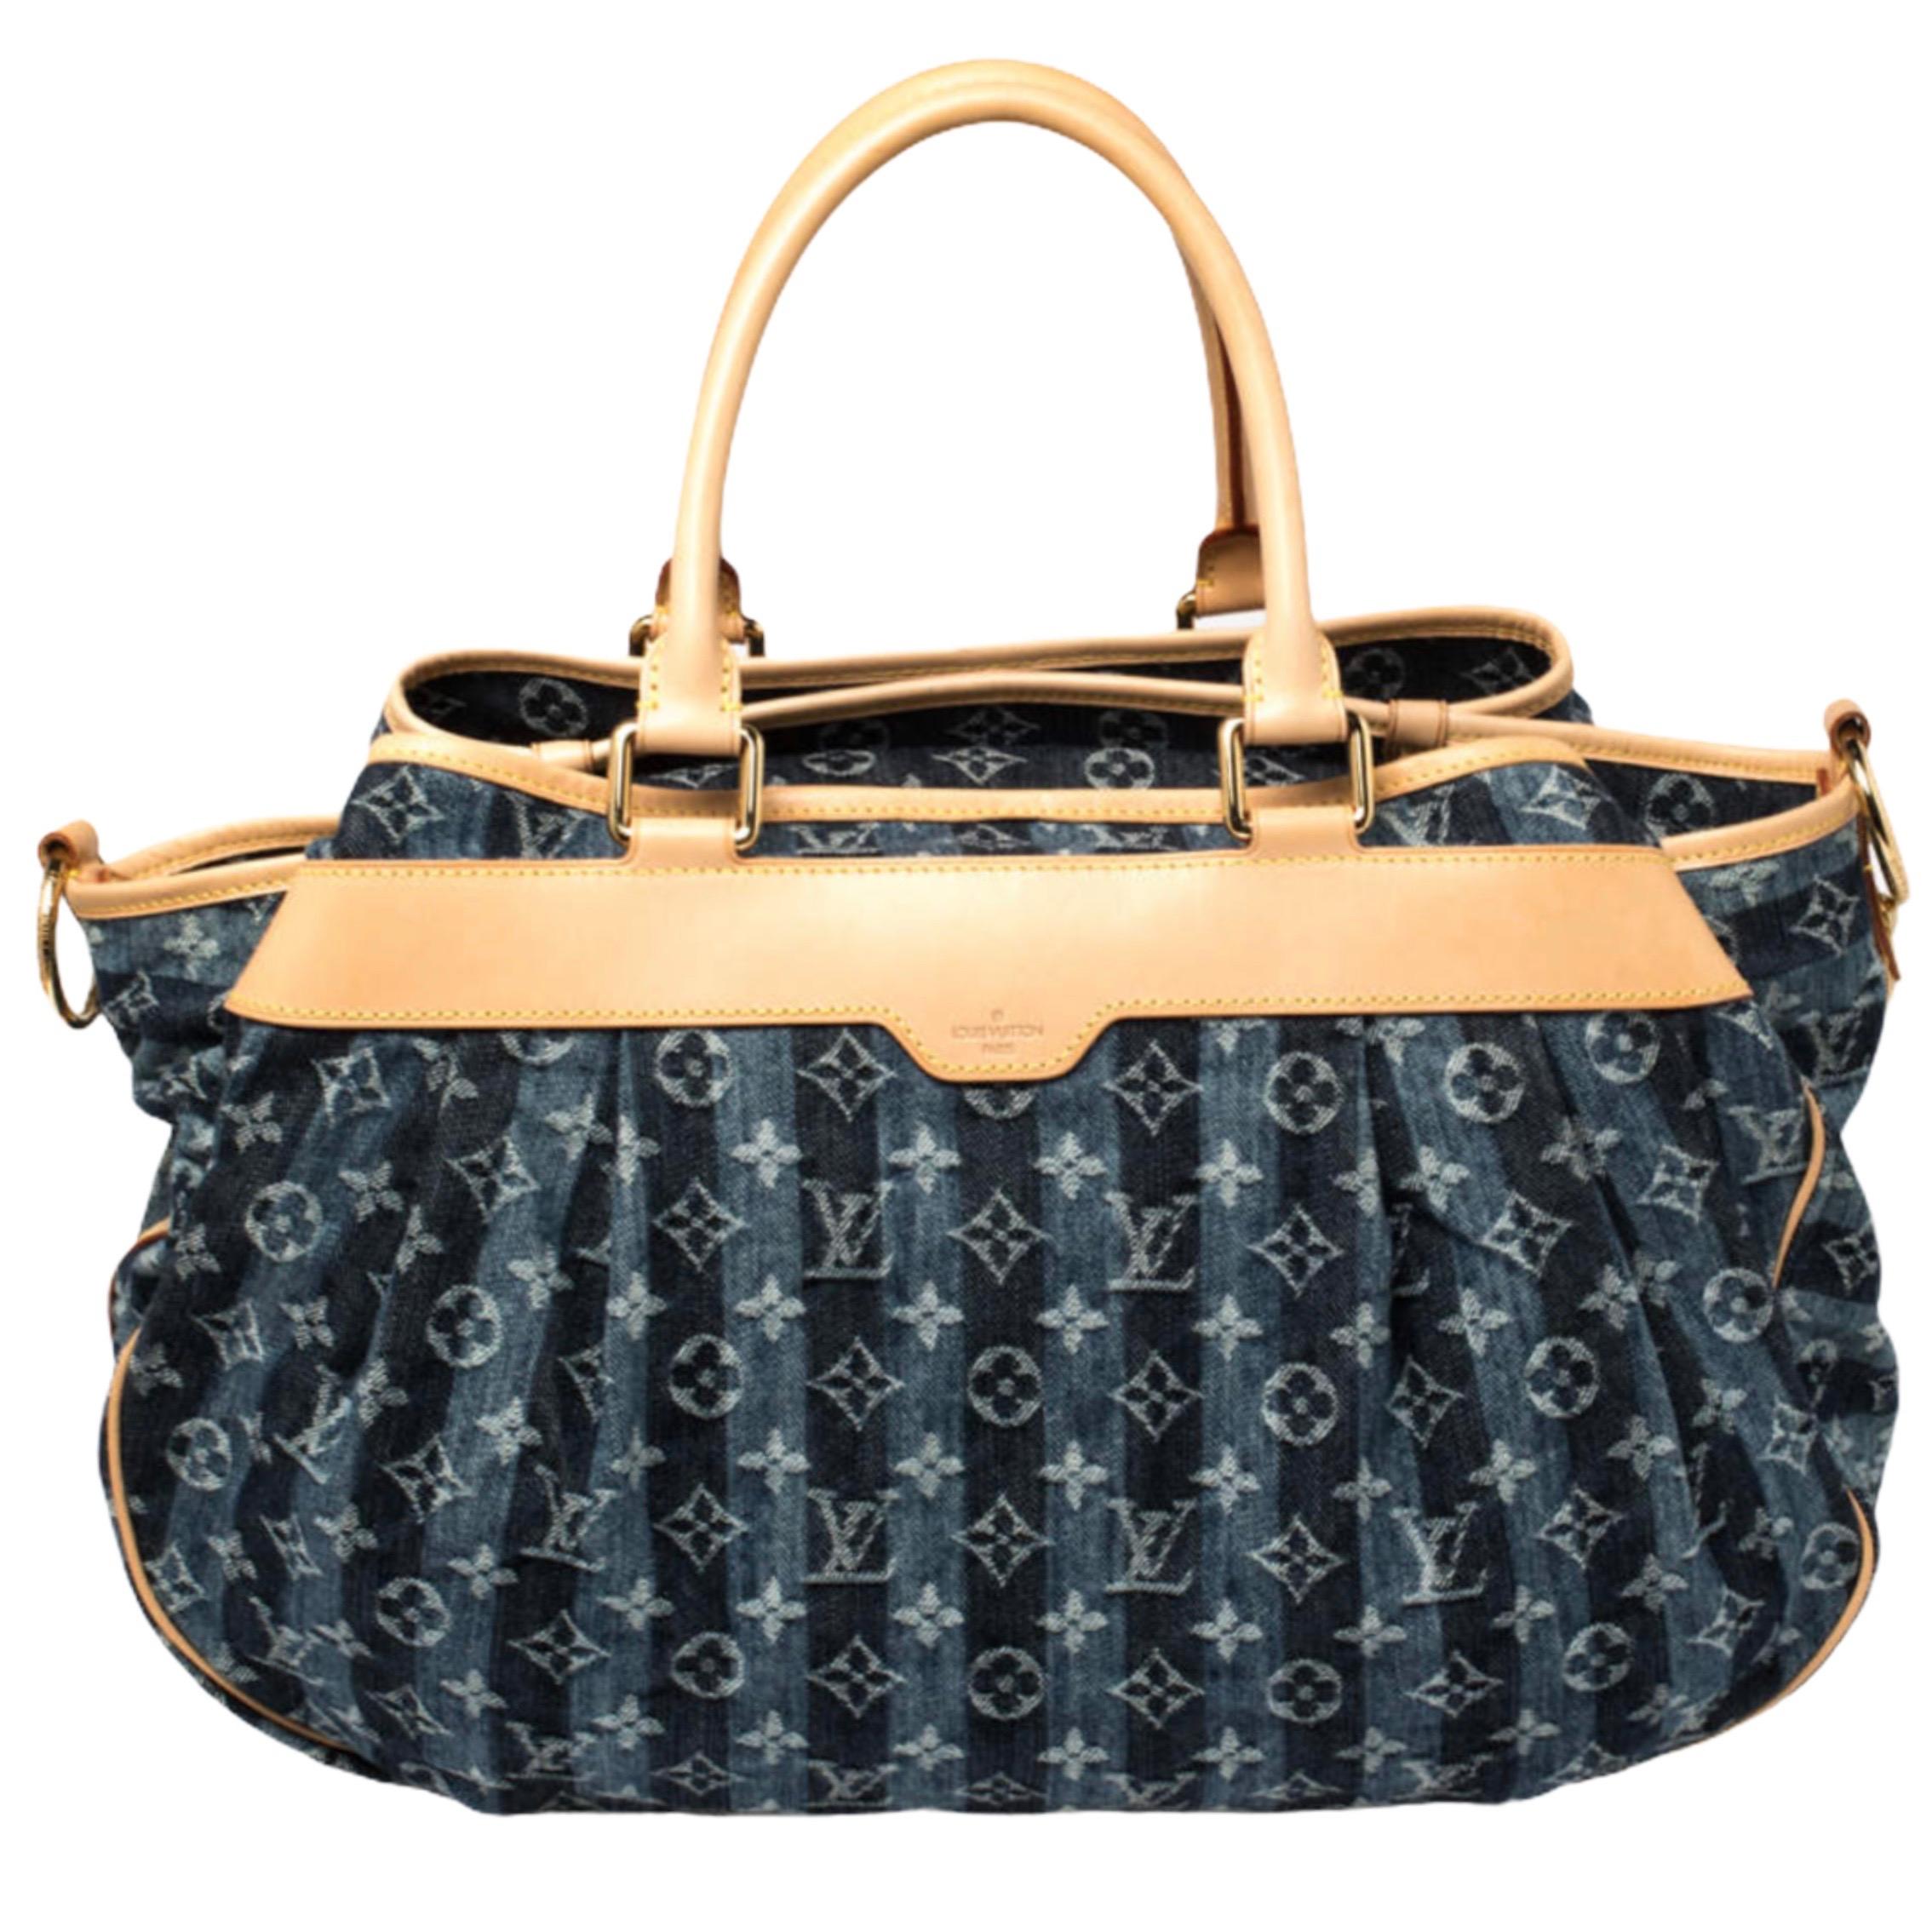 louis vuitton trunks and bags collection